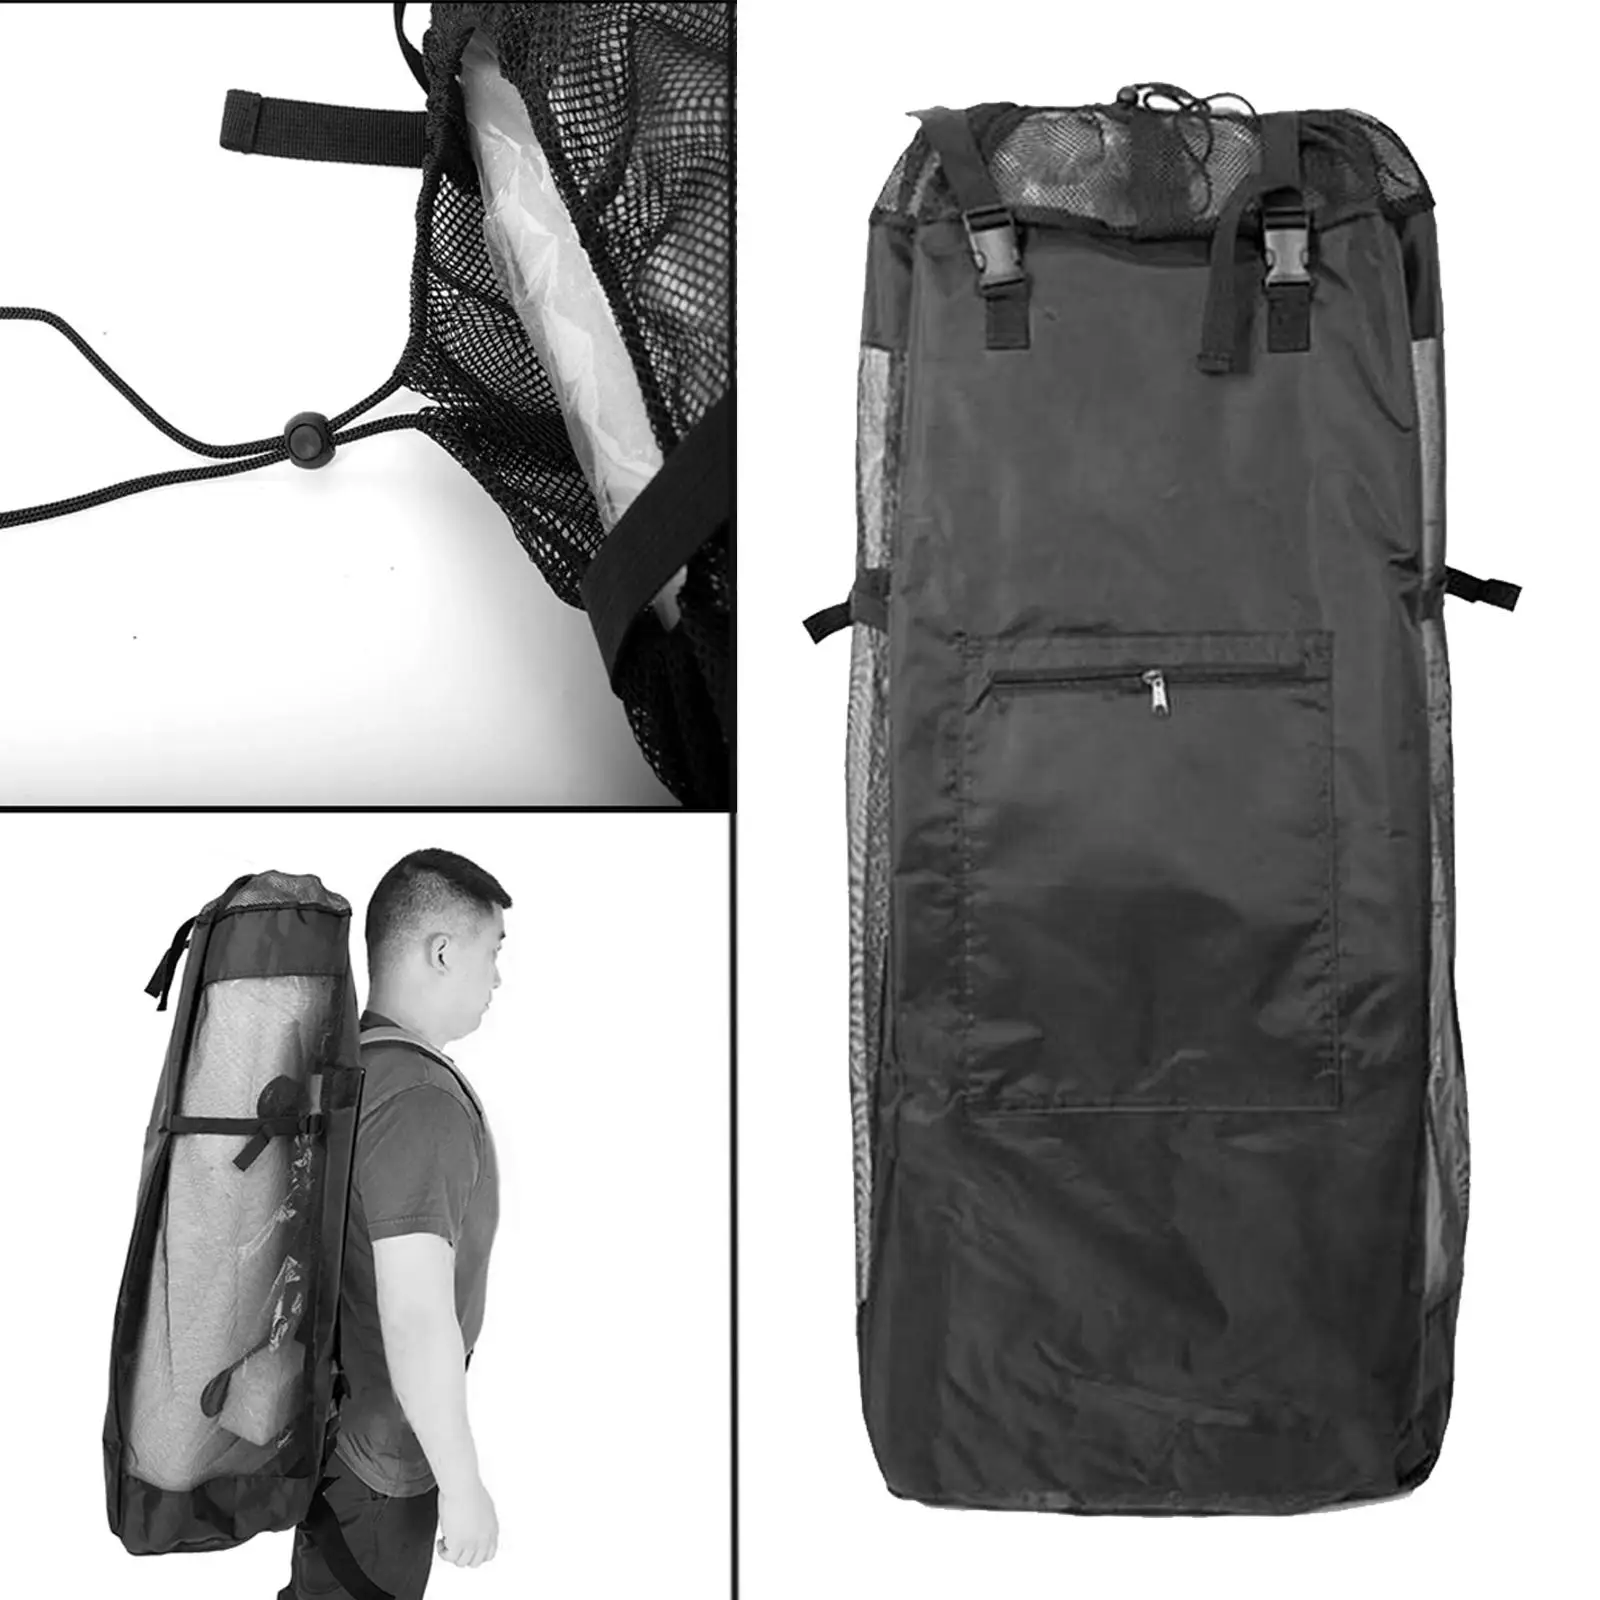  Board Travel Bag Rucksack Accessories Inflatable Paddleboard